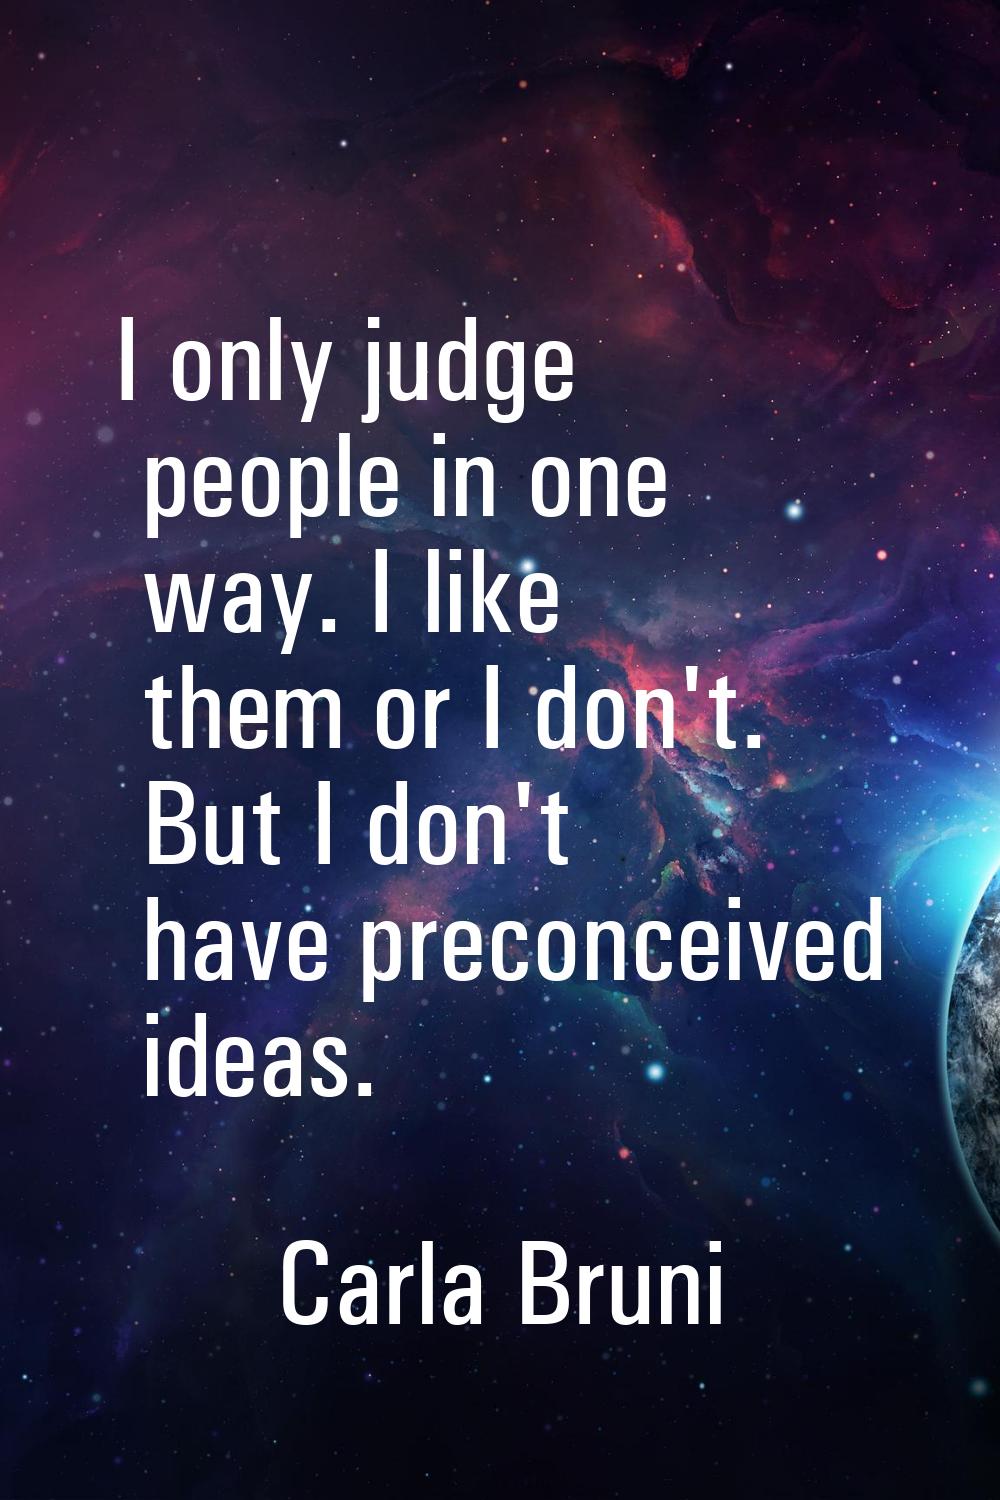 I only judge people in one way. I like them or I don't. But I don't have preconceived ideas.